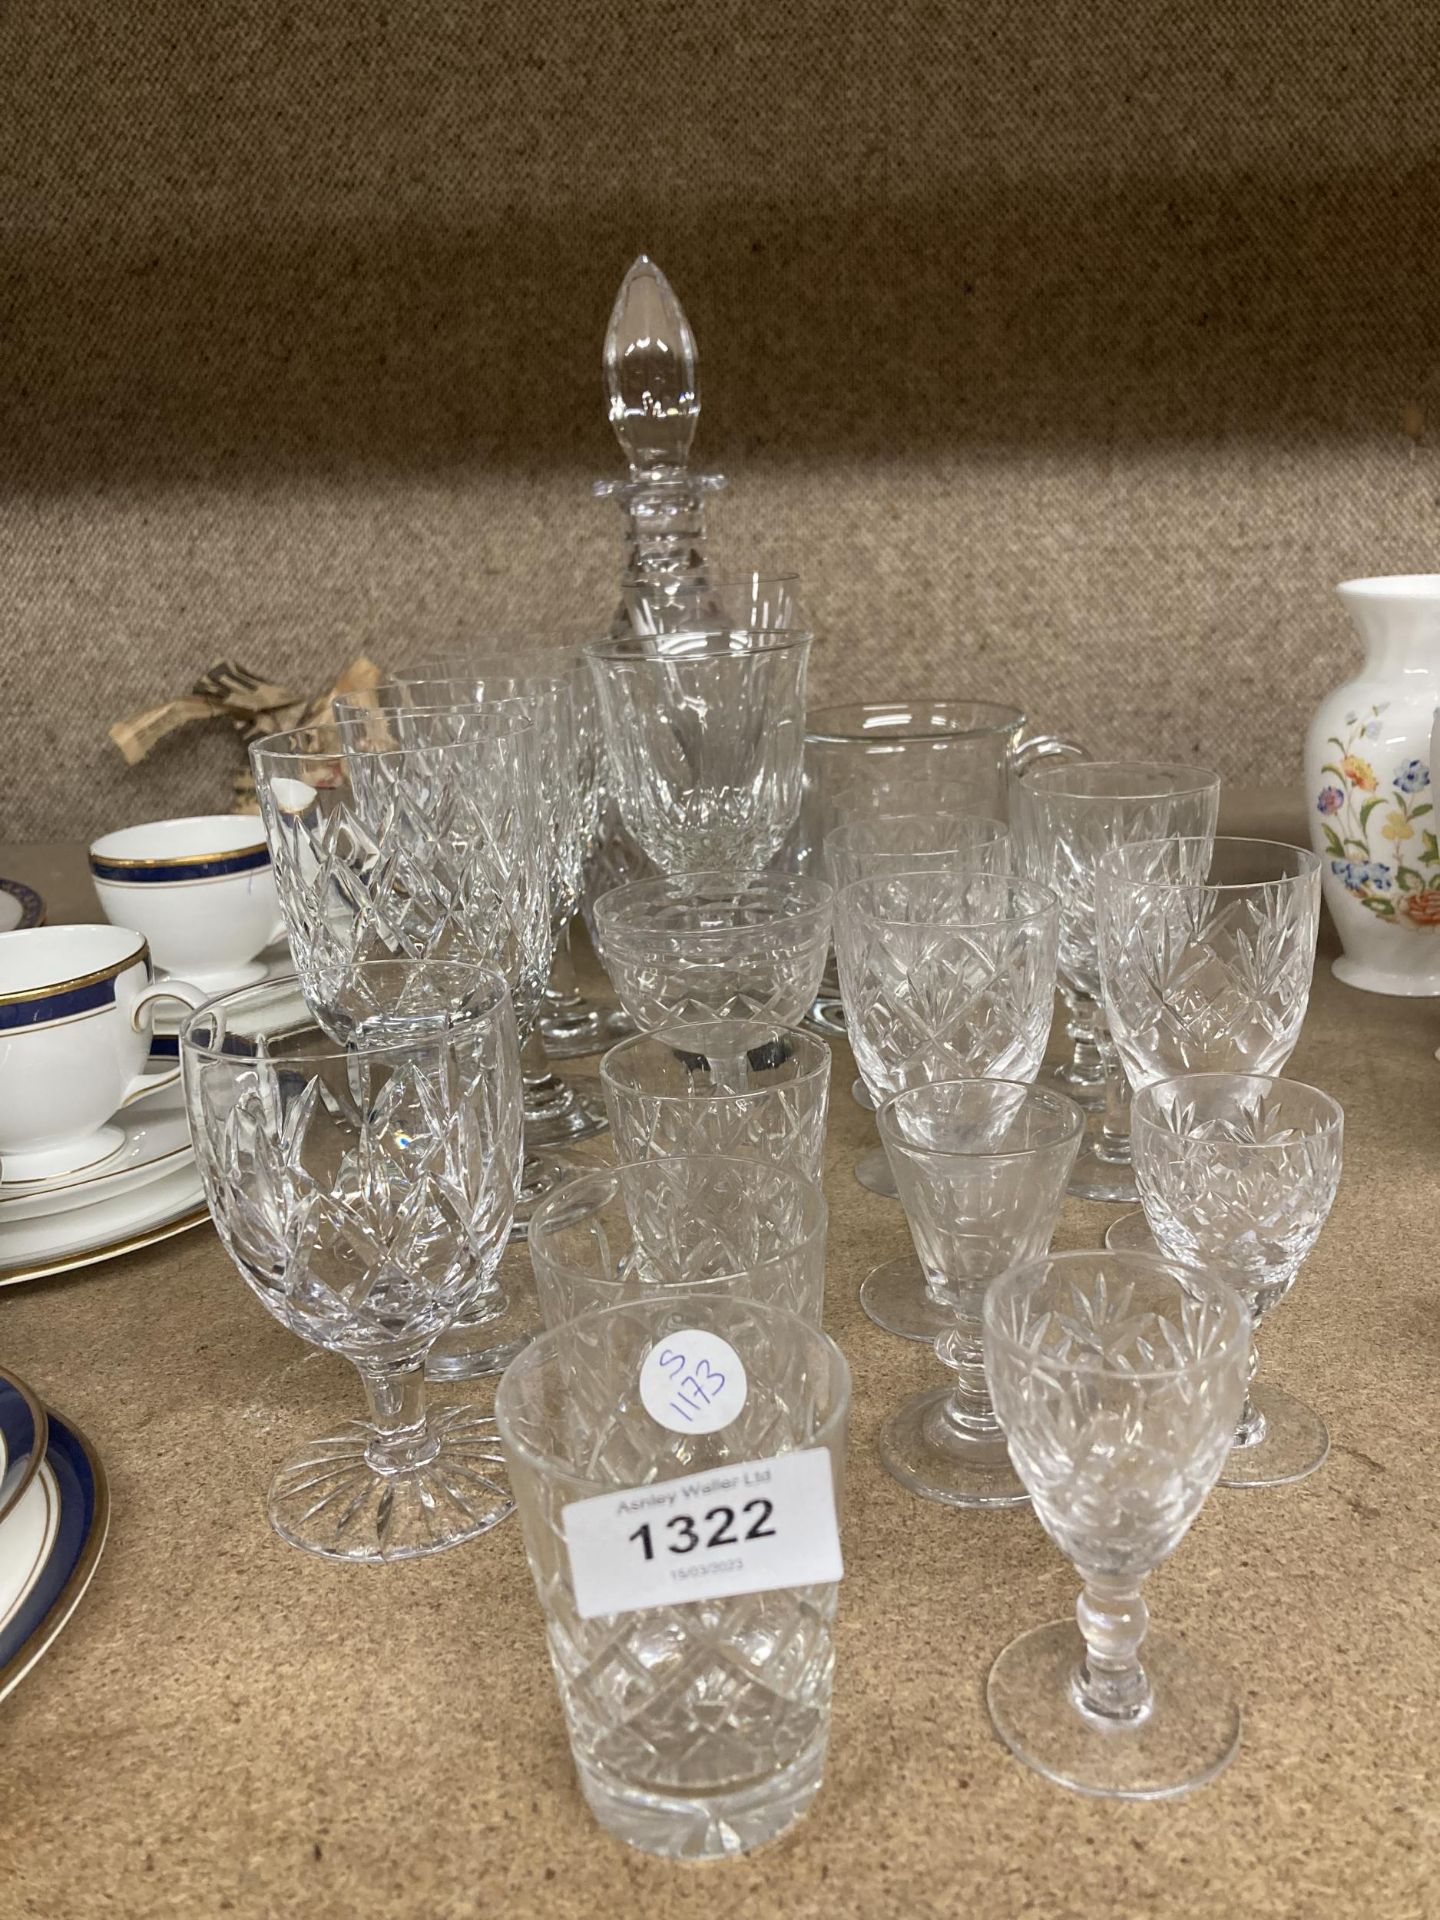 A QUANTITY OF GLASSWARE TO INCLUDE A DECANTER, JUG, WINE GLASSES, SHERRY GLASSES ETC.,